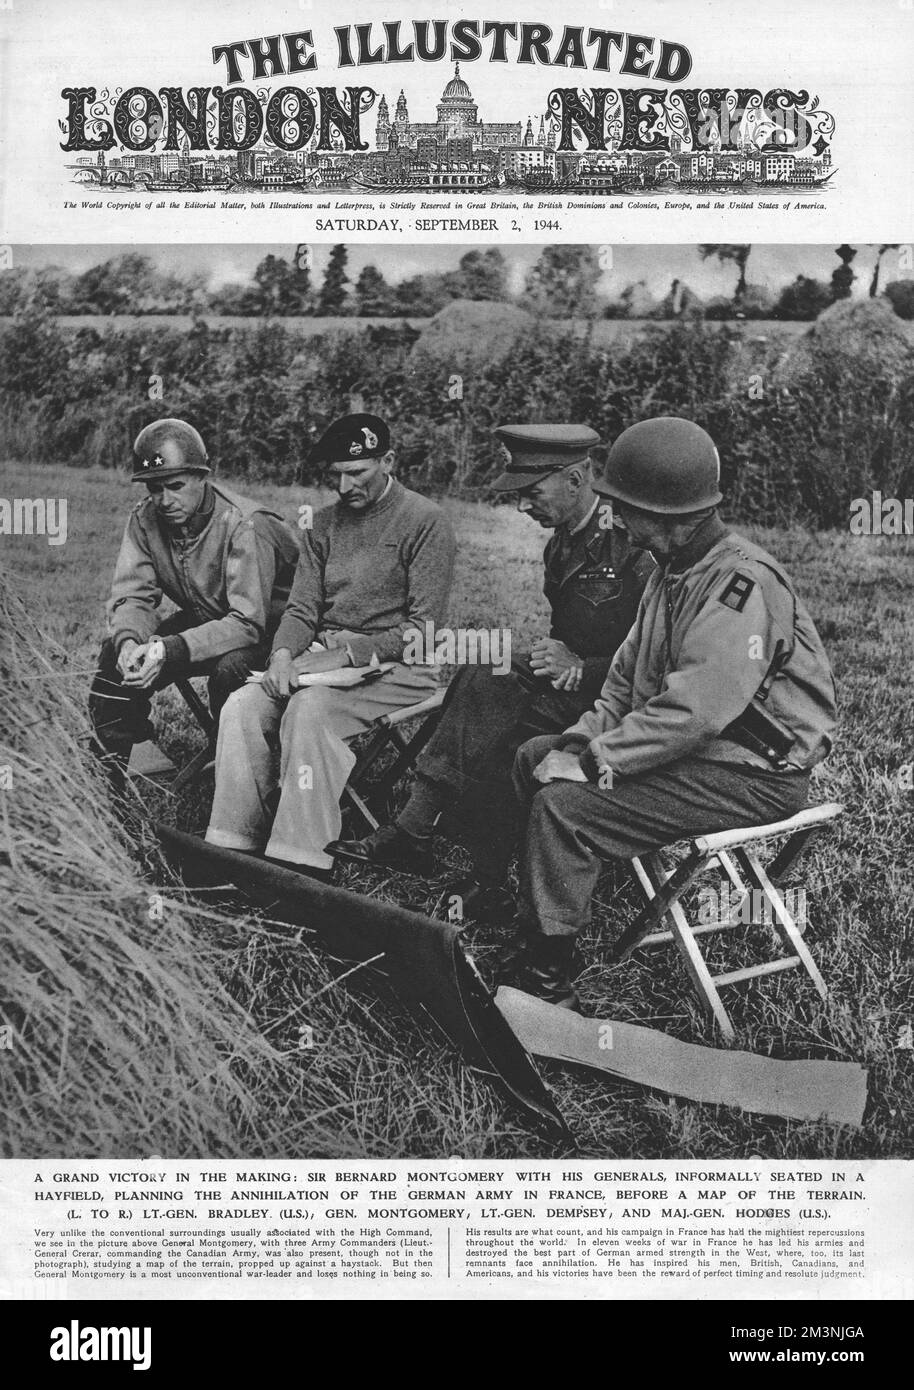 A grand victory in the making: Sir Bernard Montgomery with his generals, informally seated in a hayfield, planning the annihilation of the German army in France, before a map of the terrain. Left to right: Lt.-Gen. Bradley (U.S.), Gen. Montgomery, Lt.-Gen. Dempsey, and Maj.-Gen. Hodges (U.S).     Date: 1944 Stock Photo